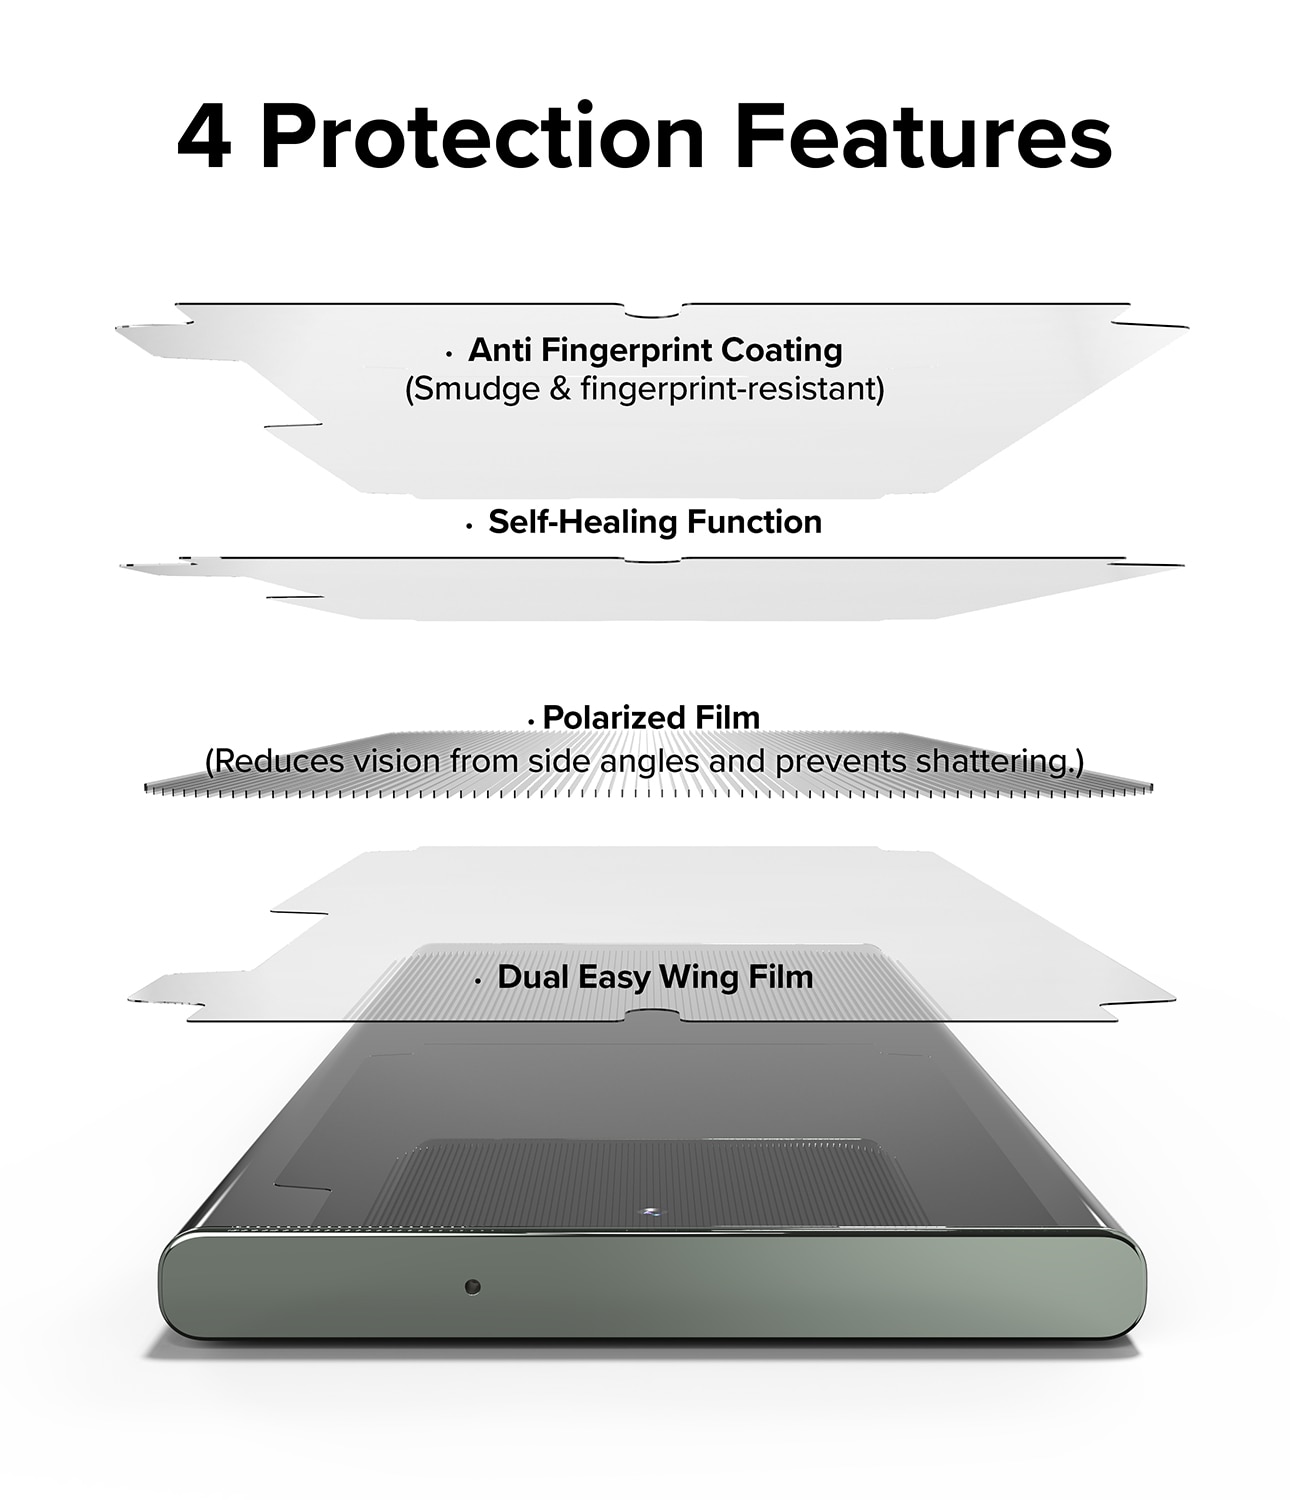 Privacy Dual Easy Wing Screen Protector Samsung Galaxy S23 Ultra